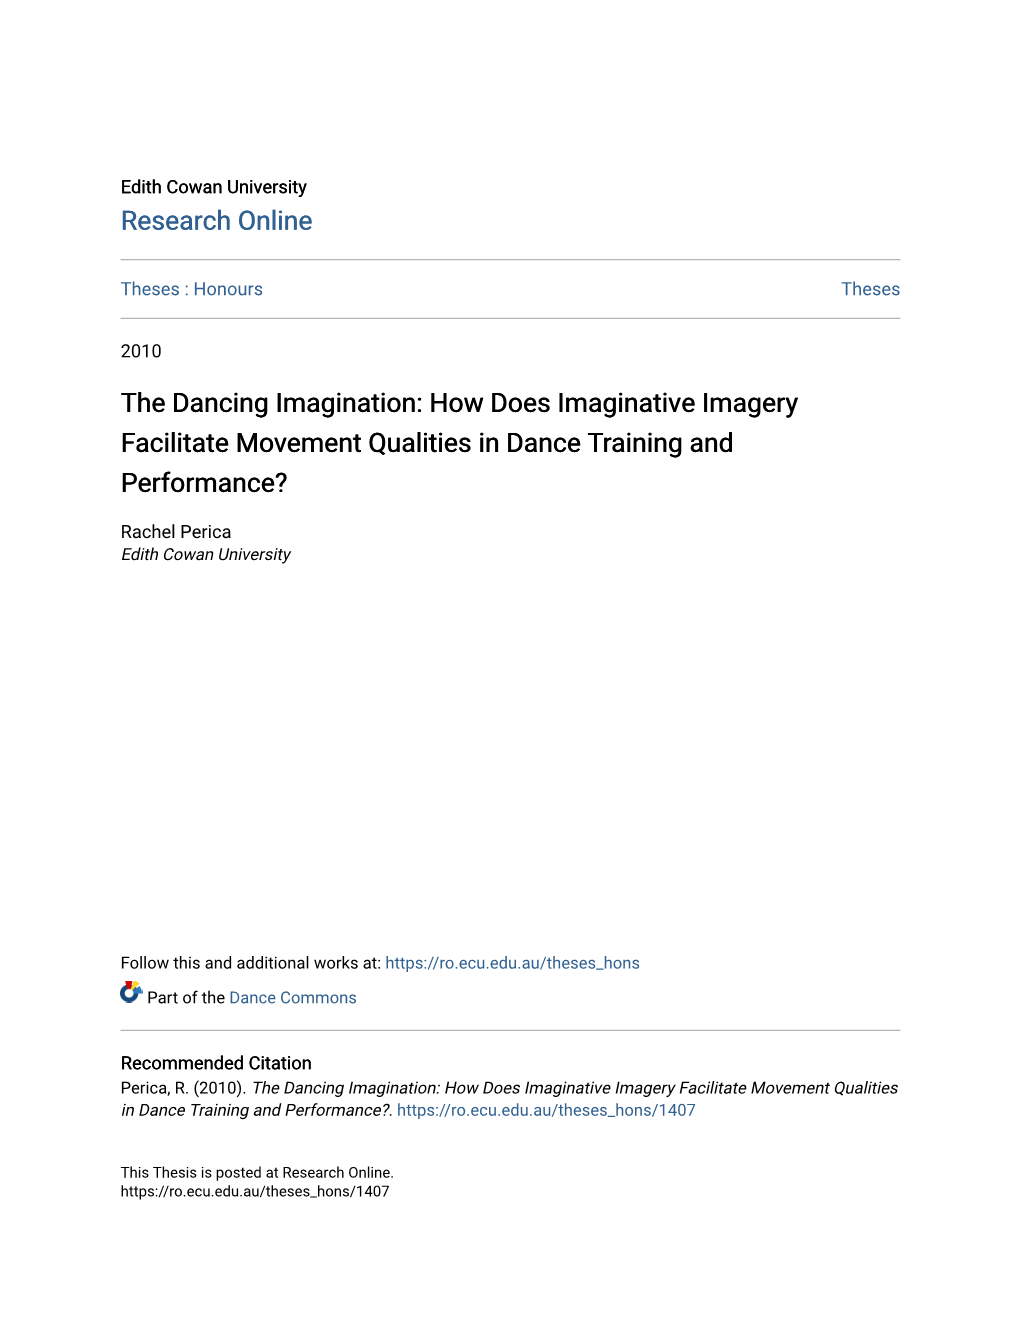 The Dancing Imagination: How Does Imaginative Imagery Facilitate Movement Qualities in Dance Training and Performance?